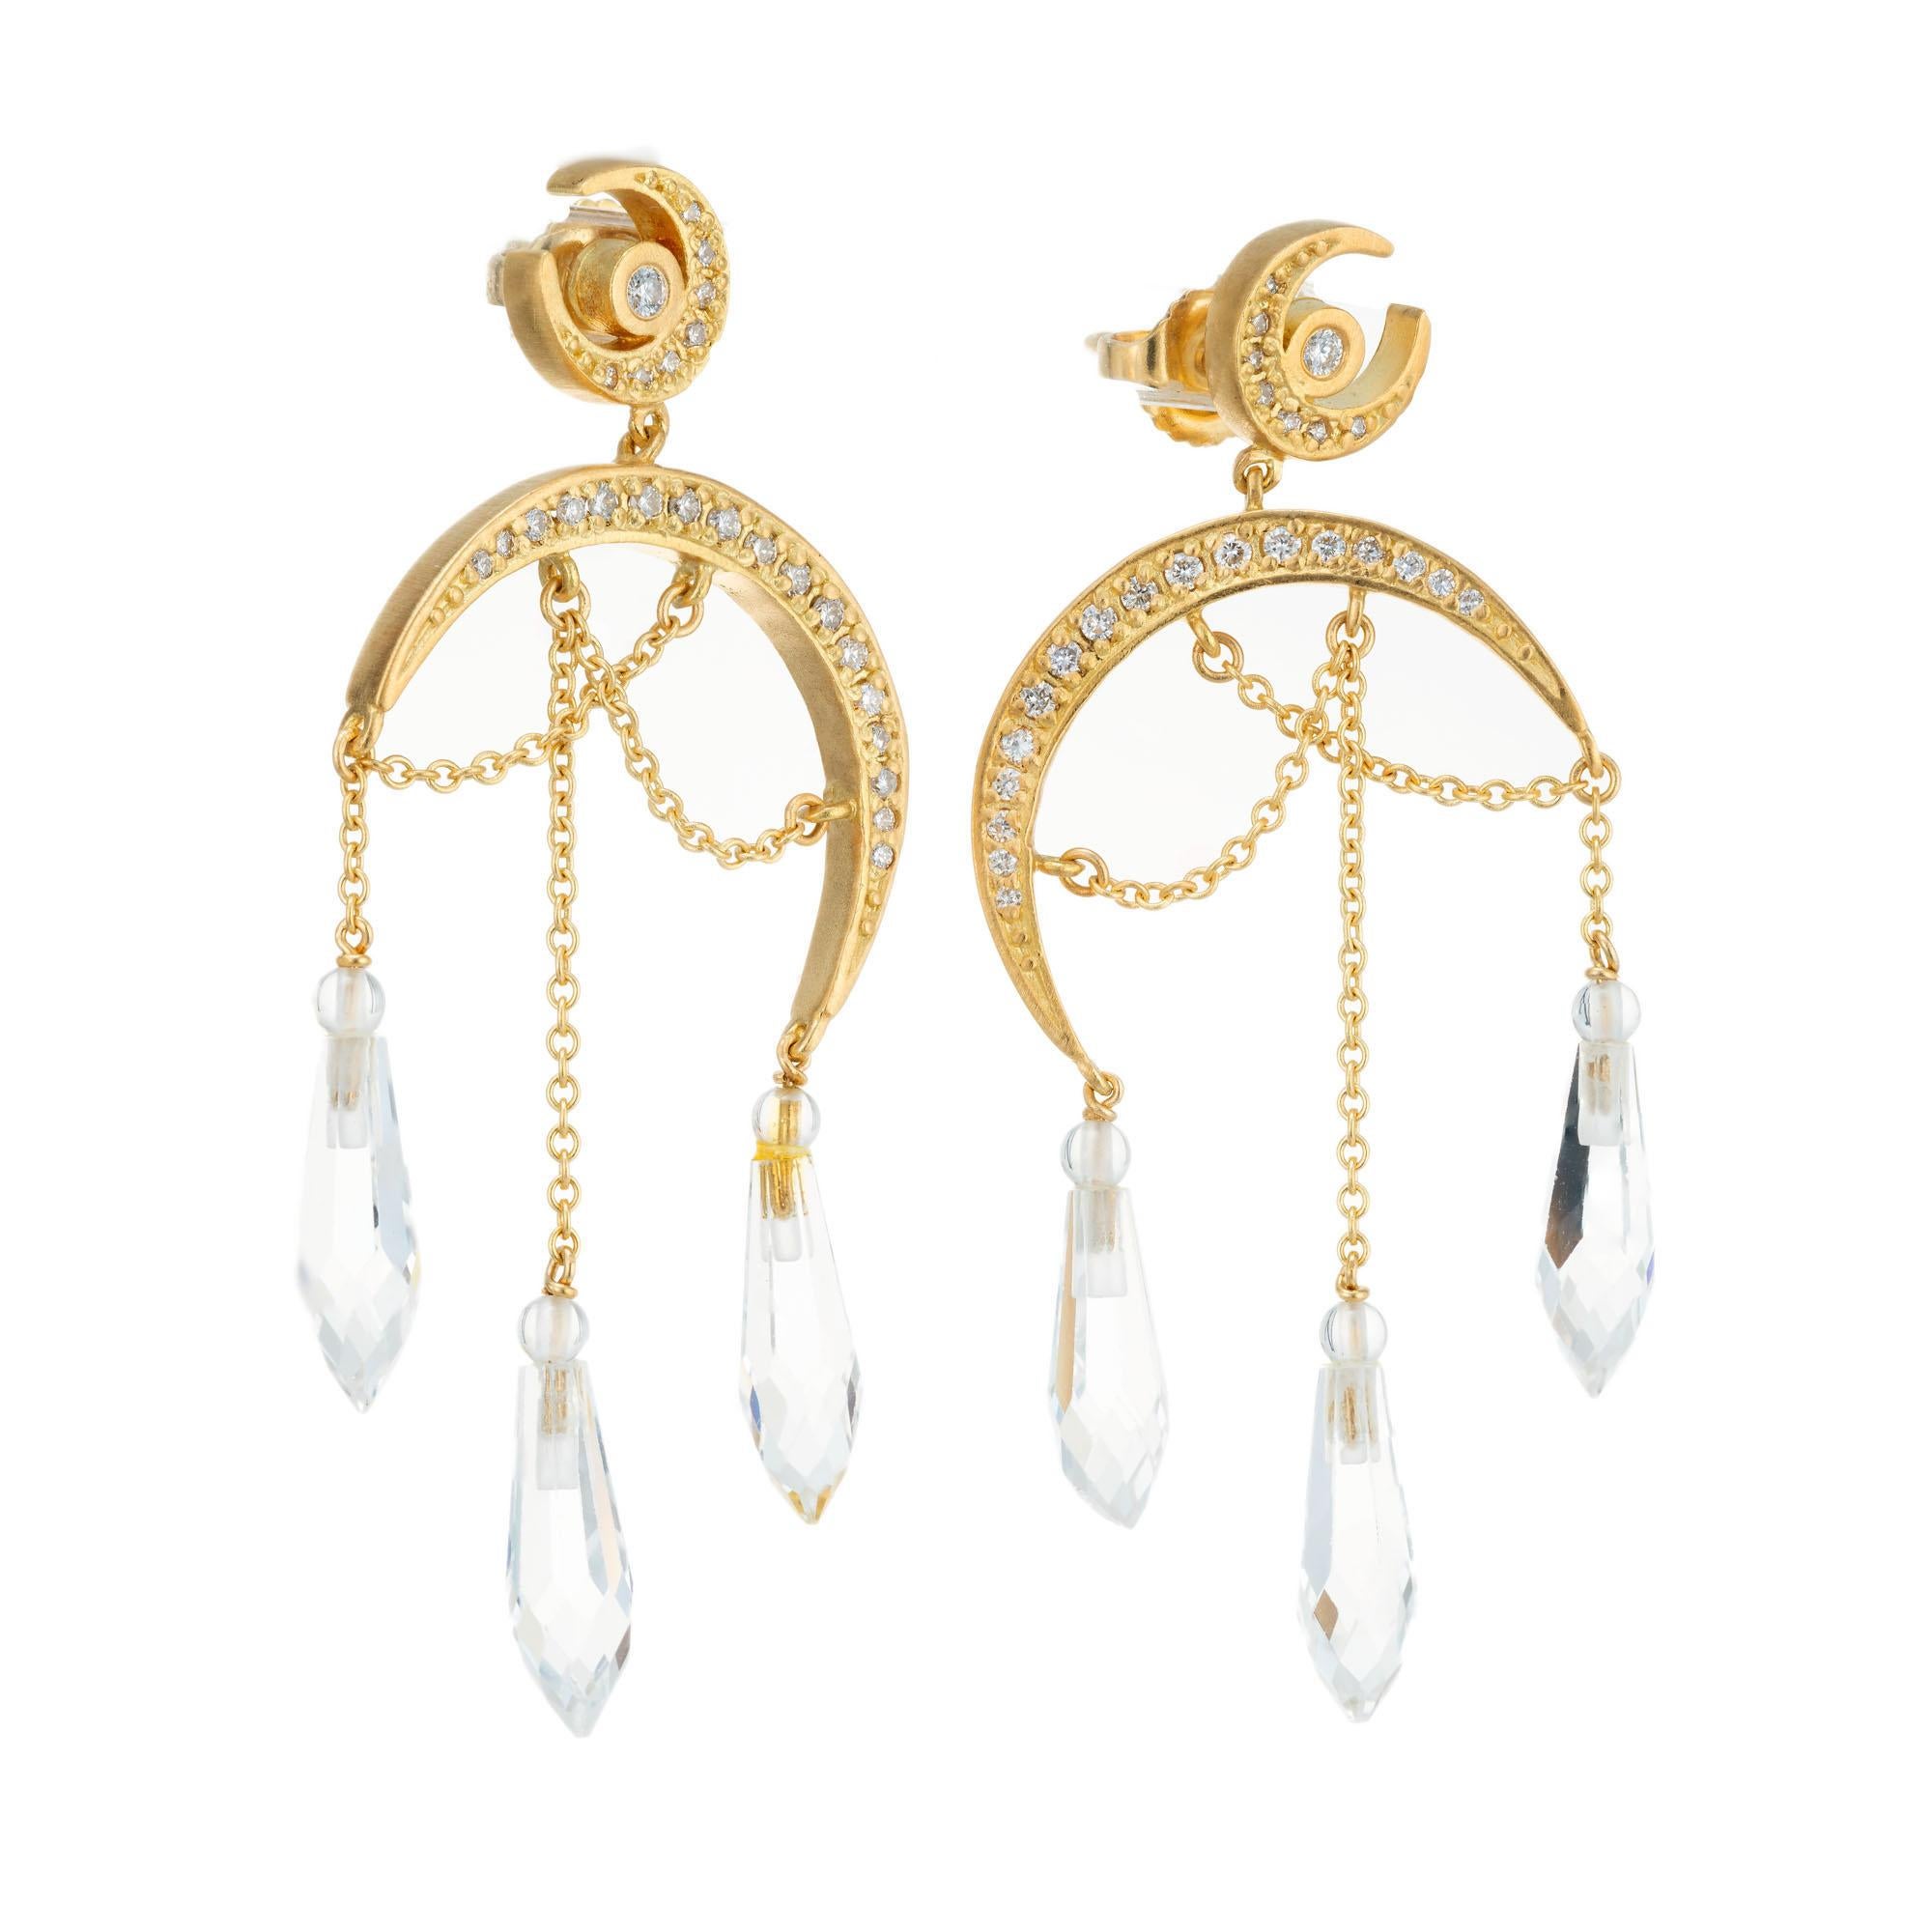 Topaz and diamond earrings. 50 round brilliant cut diamonds set in two 18k yellow gold crescent moon shaped chandelier settings with 6 briolette Topaz dangles.  

50 round brilliant cut diamonds, G SI approx. .50cts
6 briolette white/clear topaz,